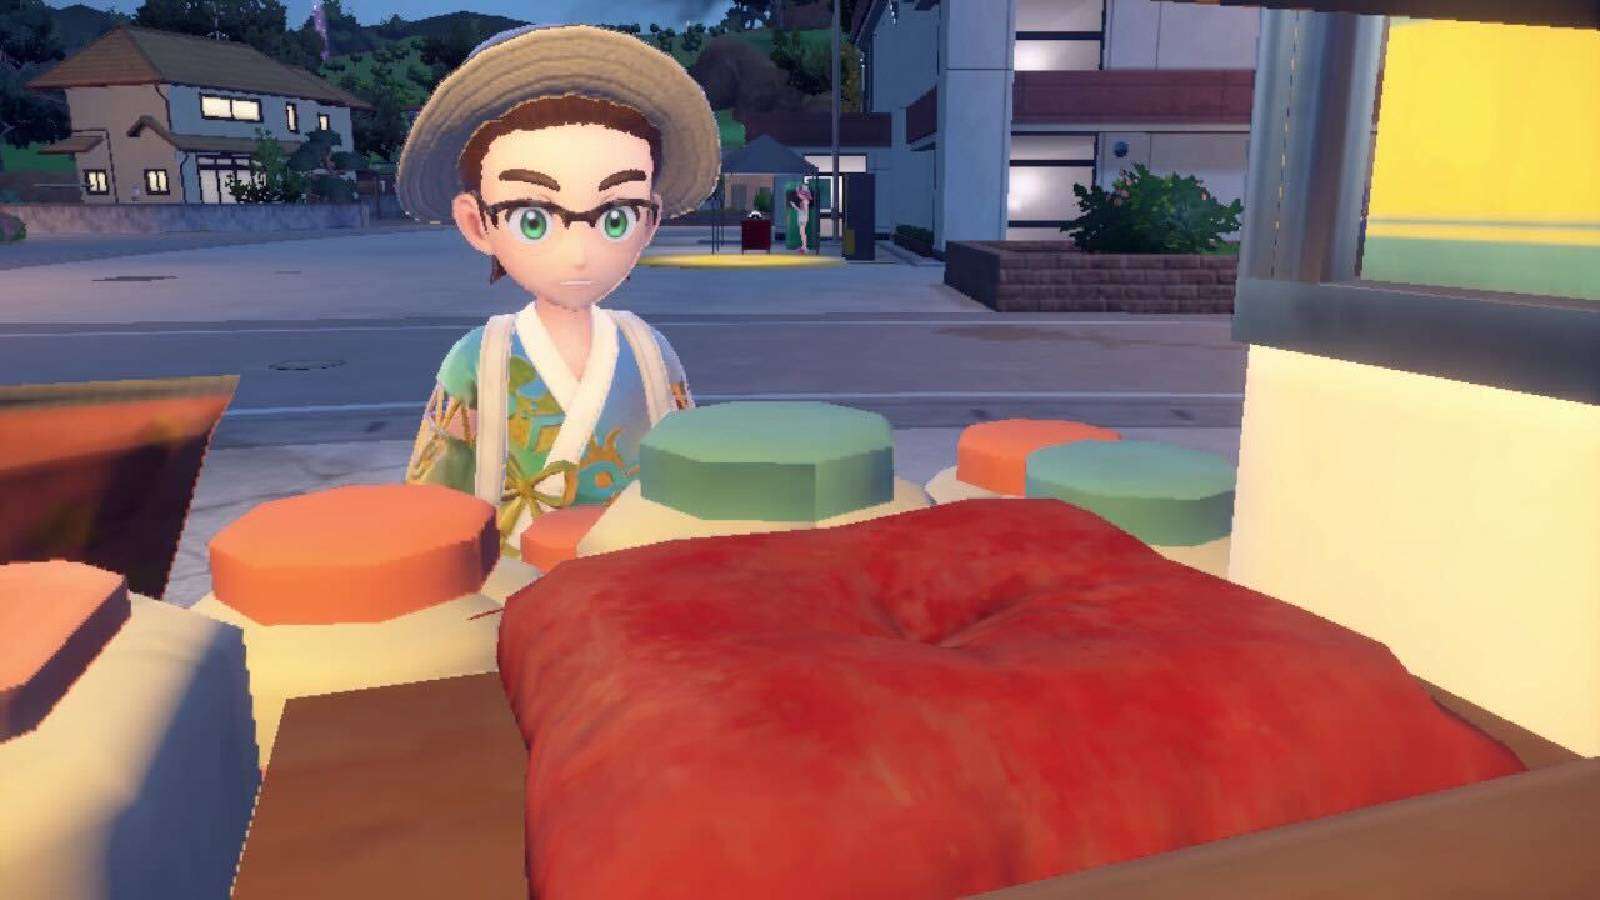 A Pokemon trainer looks at an empty red pillow